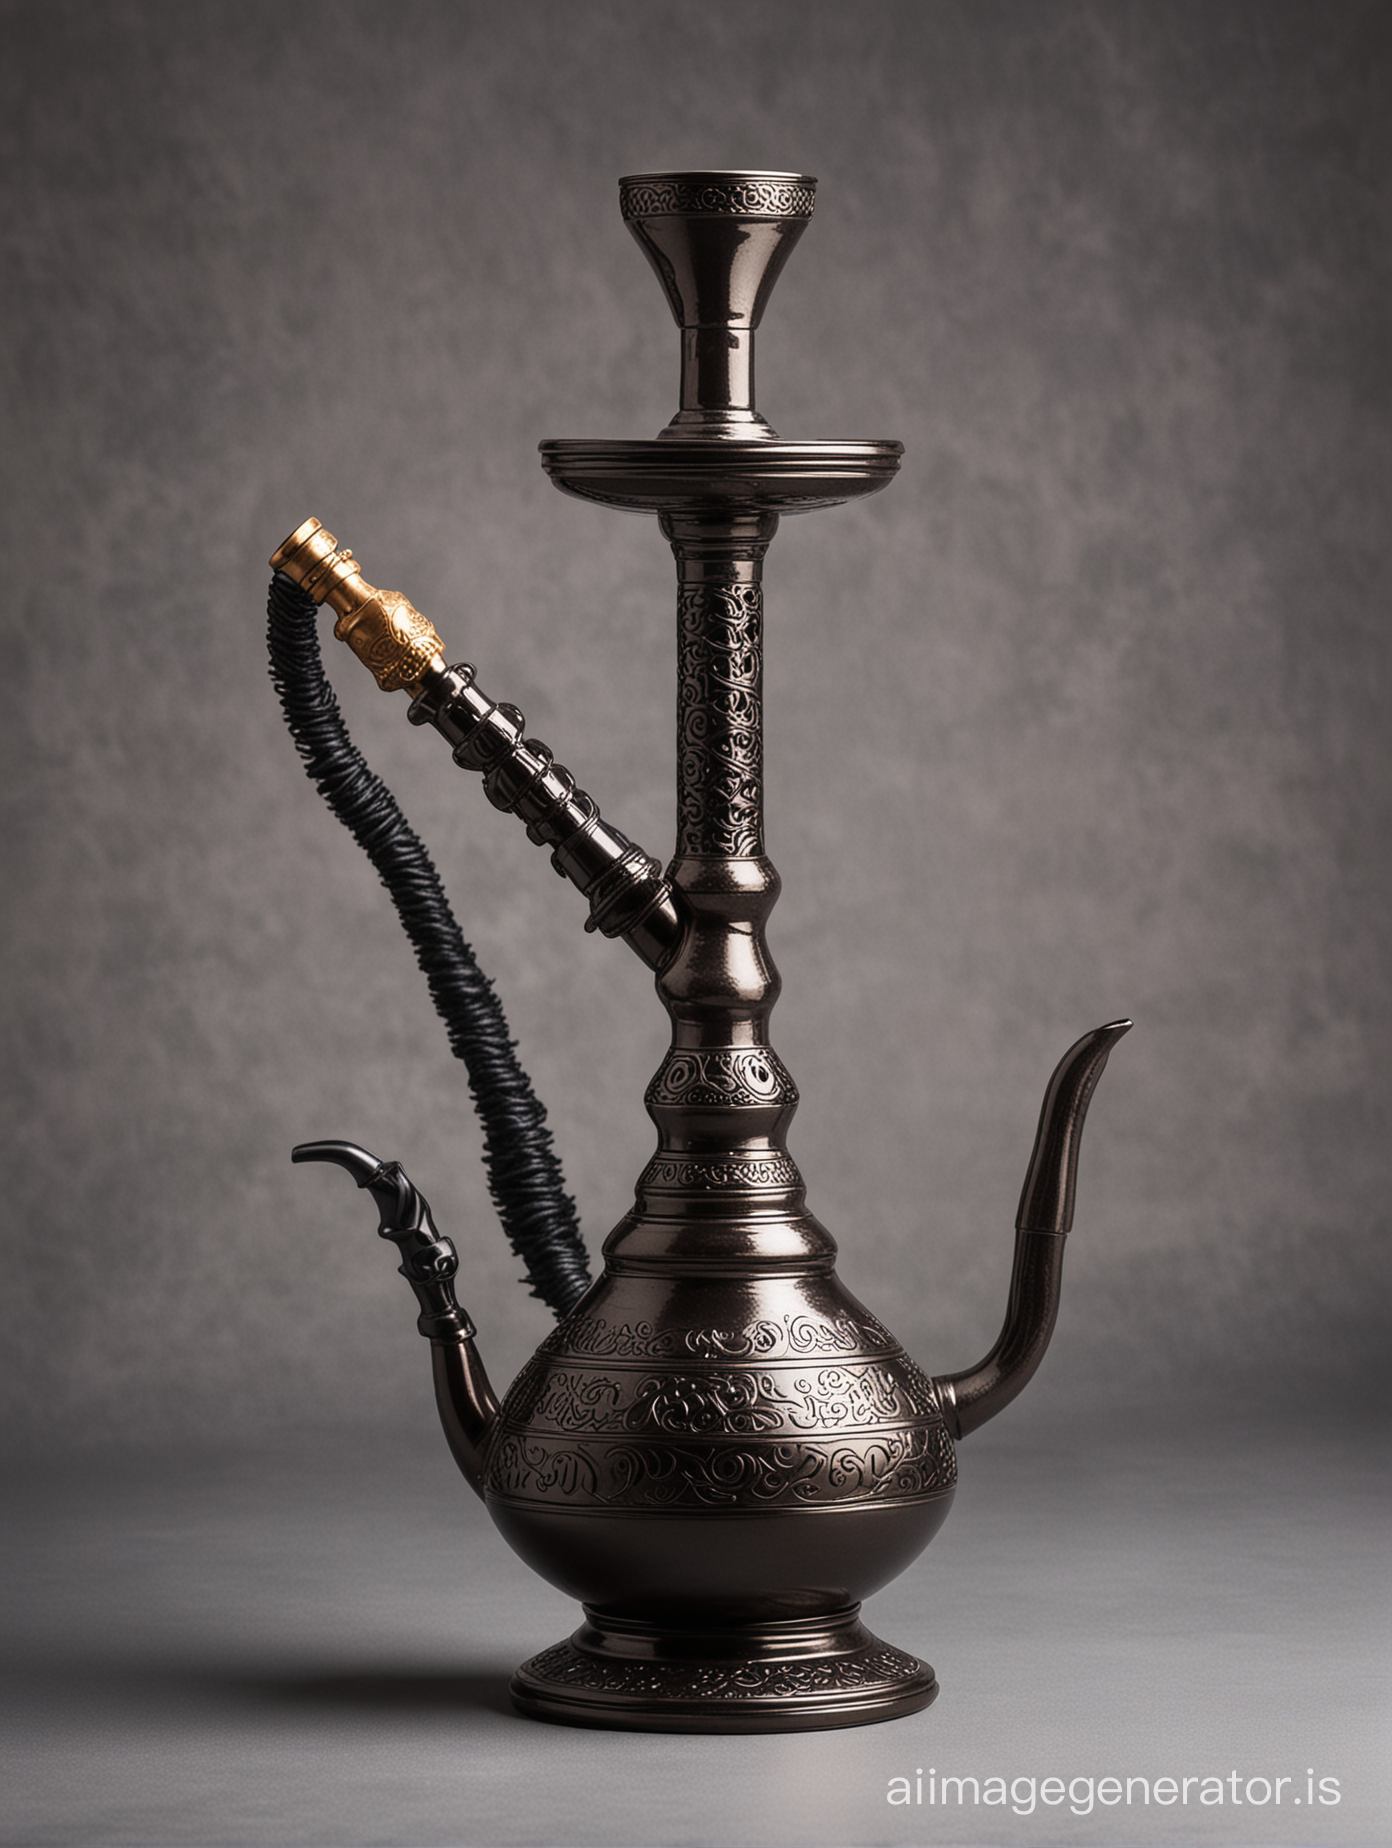 A hookah with solid background